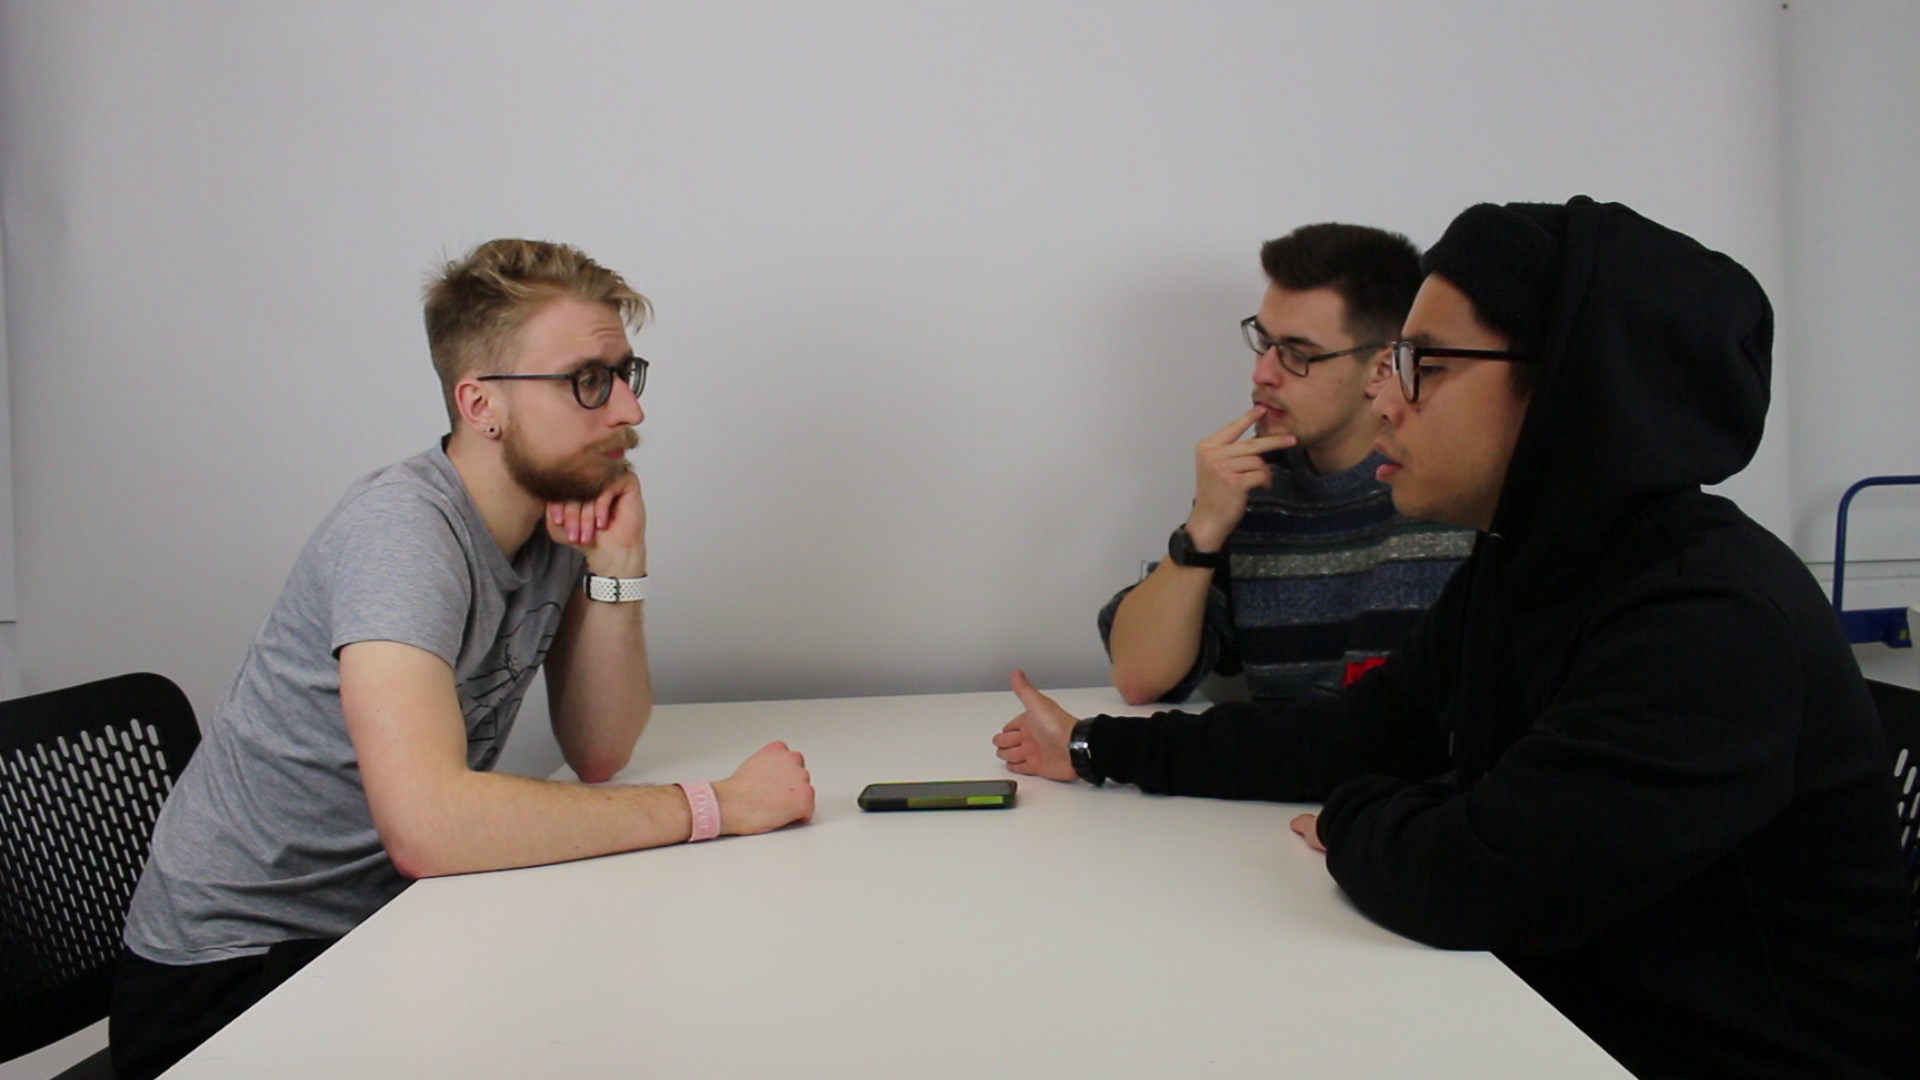 Photo of an interview with 2 people